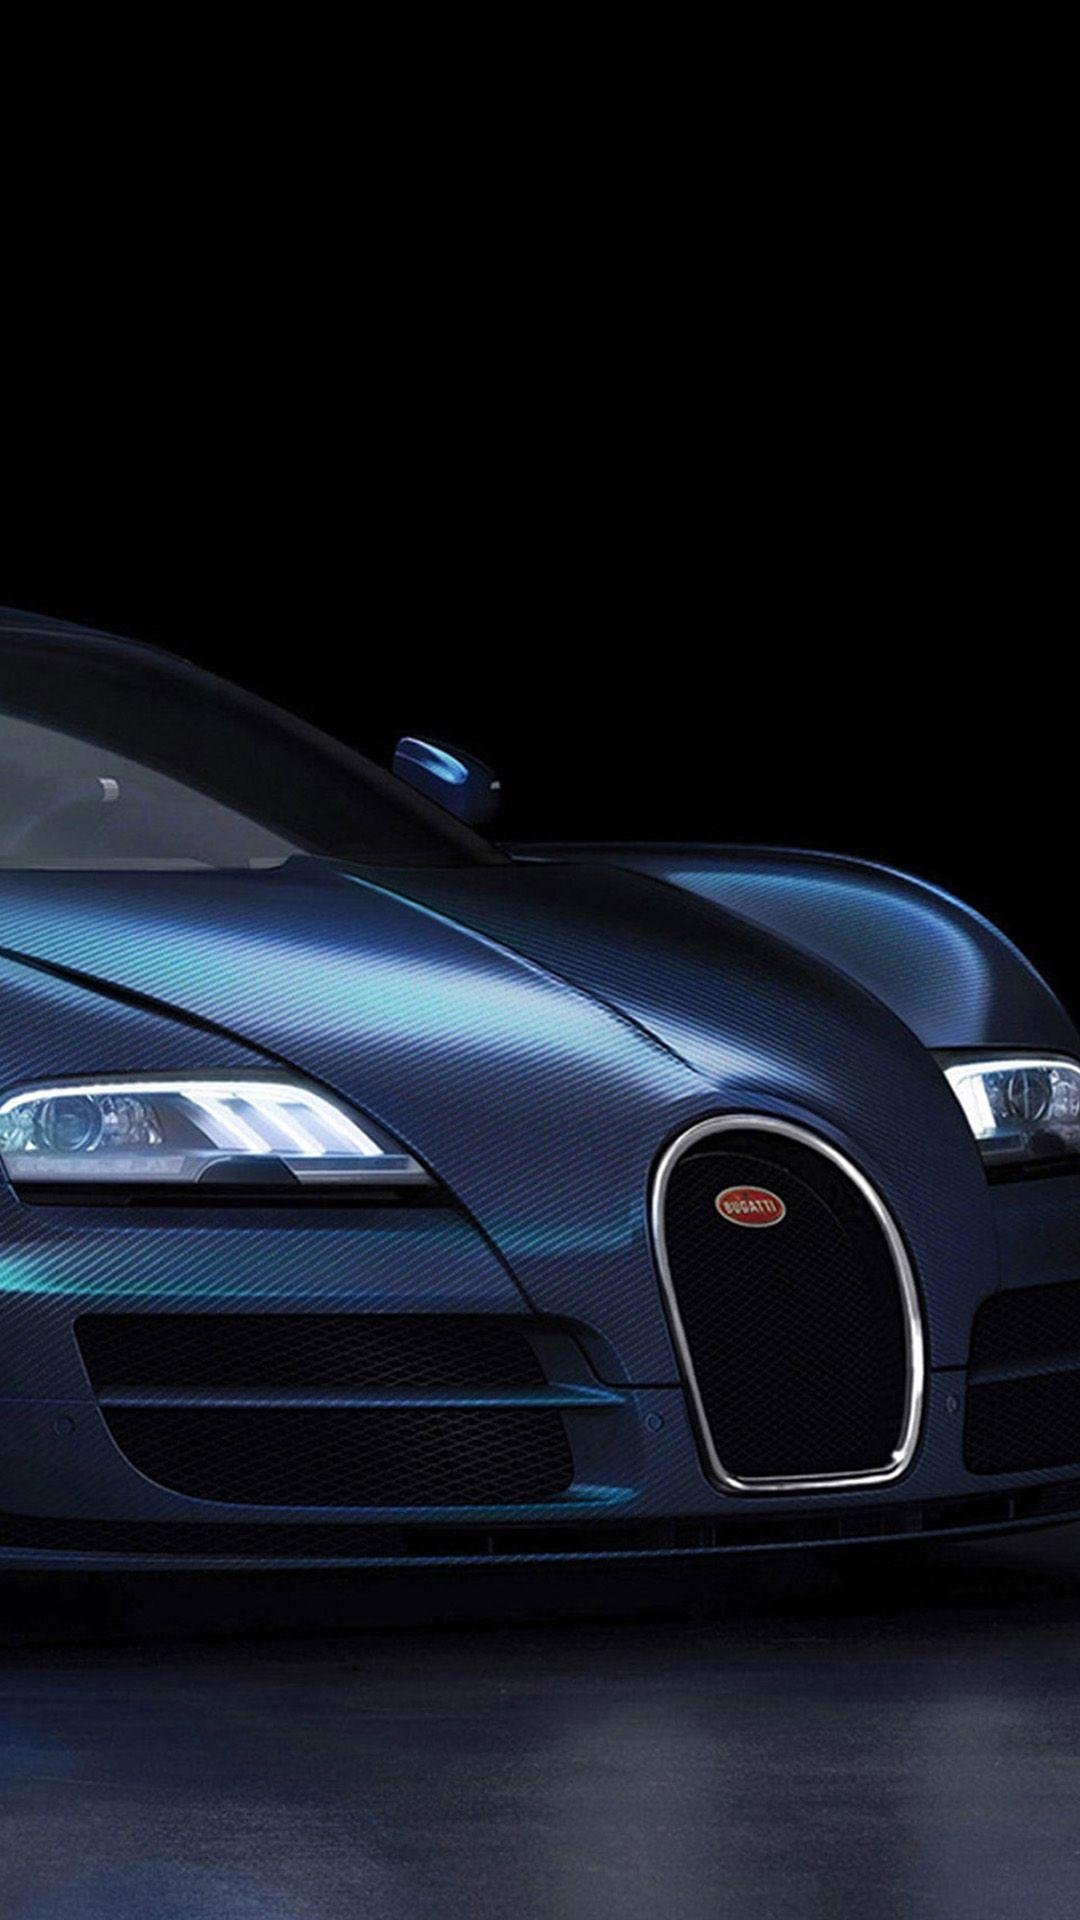 Bugatti Veyron wallpapers HD | Download Free backgrounds